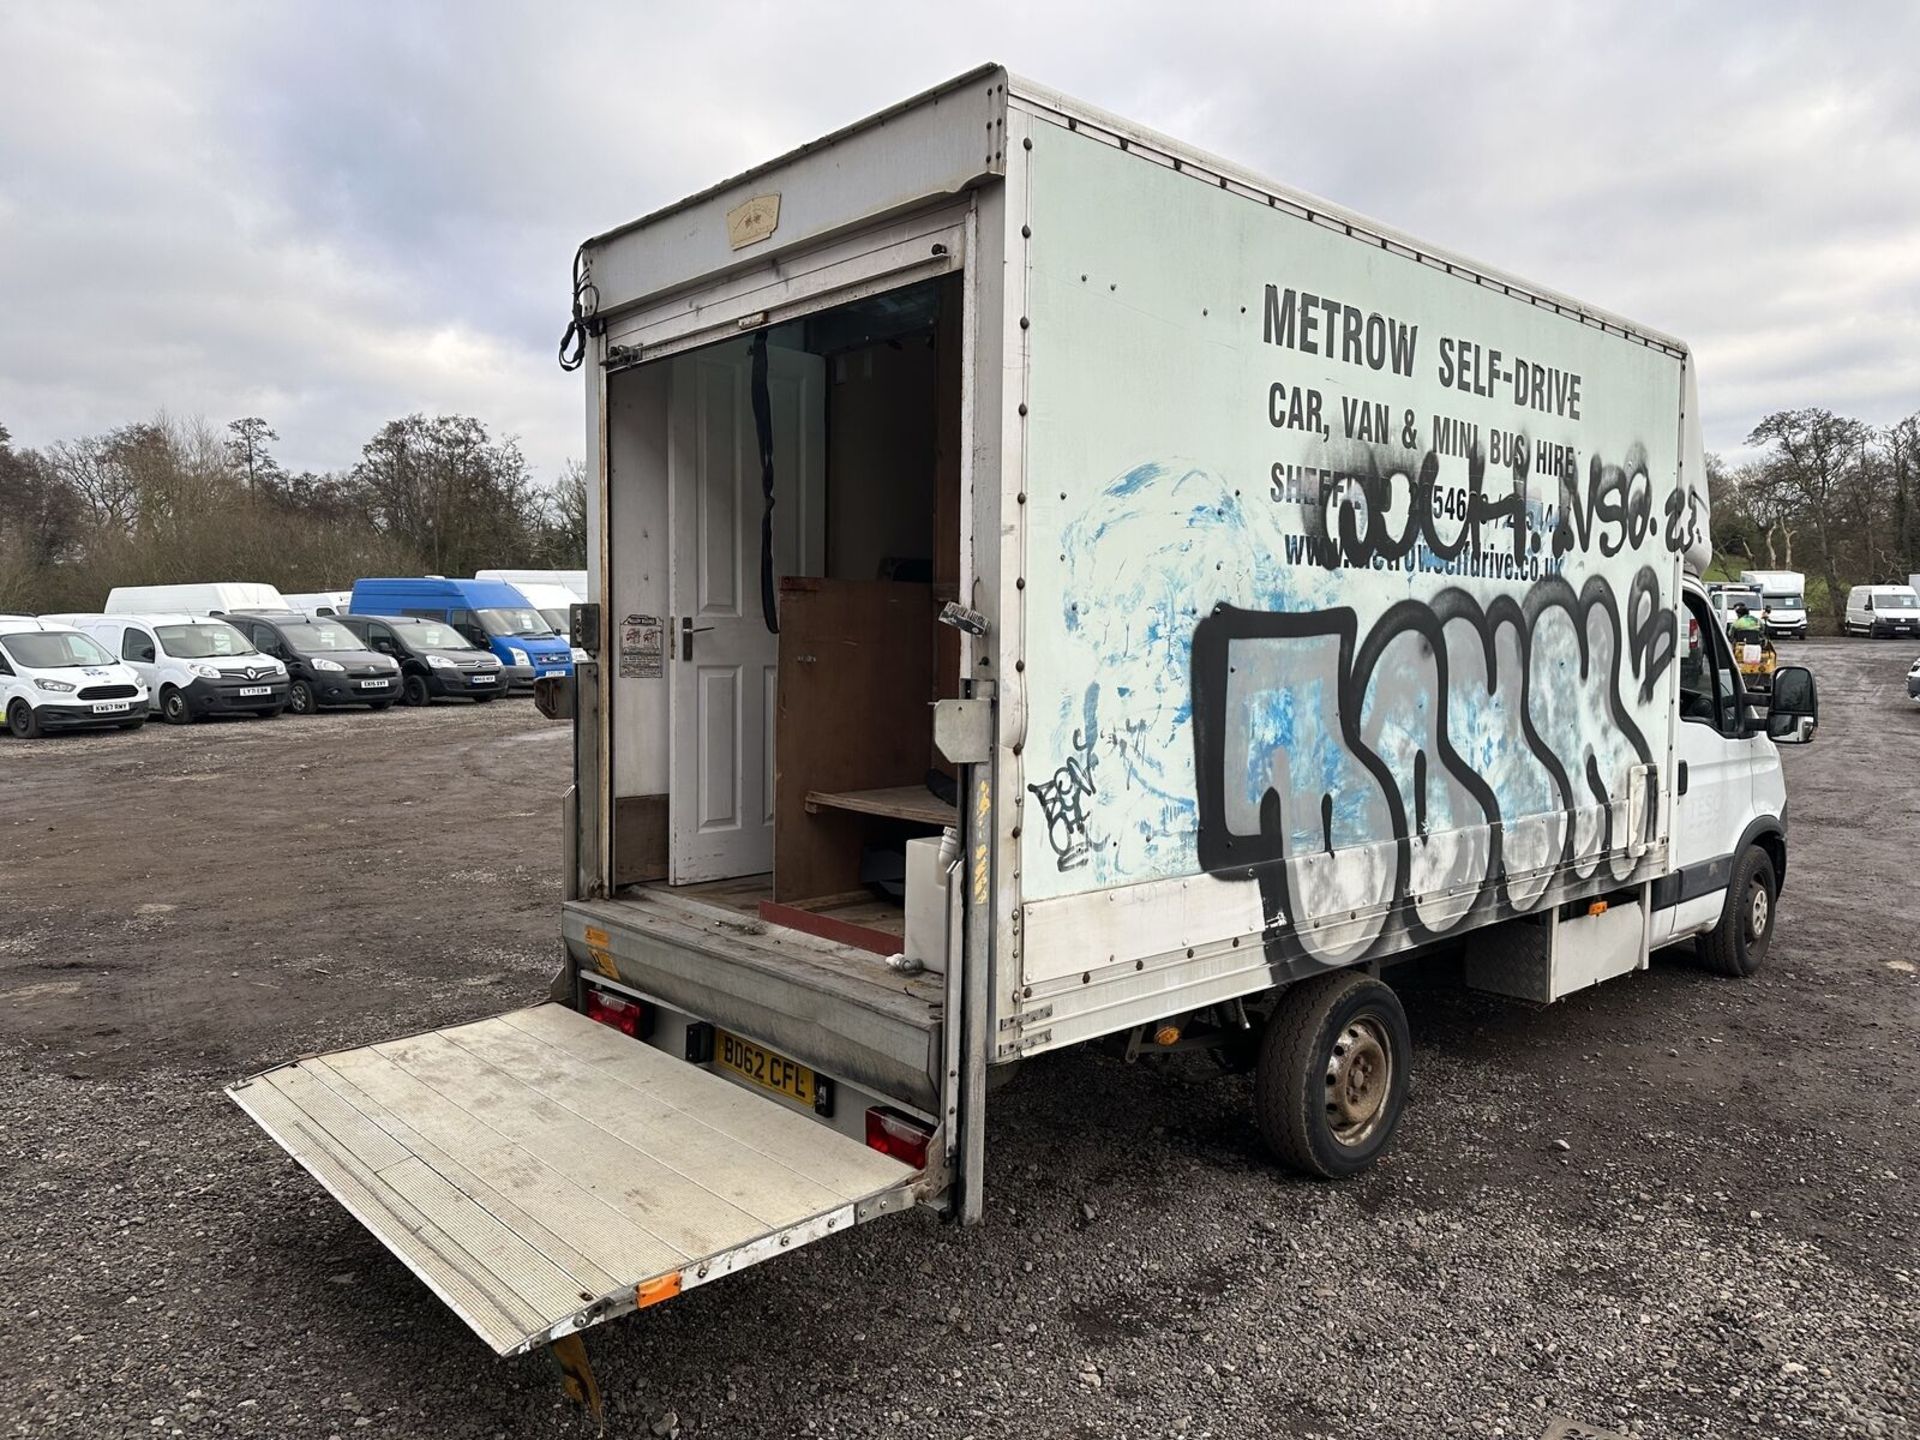 62 PLATE IVECO DAILY LUTON BOX CAMPER, SOLAR PANELS, DIESEL HEATER >>--NO VAT ON HAMMER--<< - Image 13 of 19